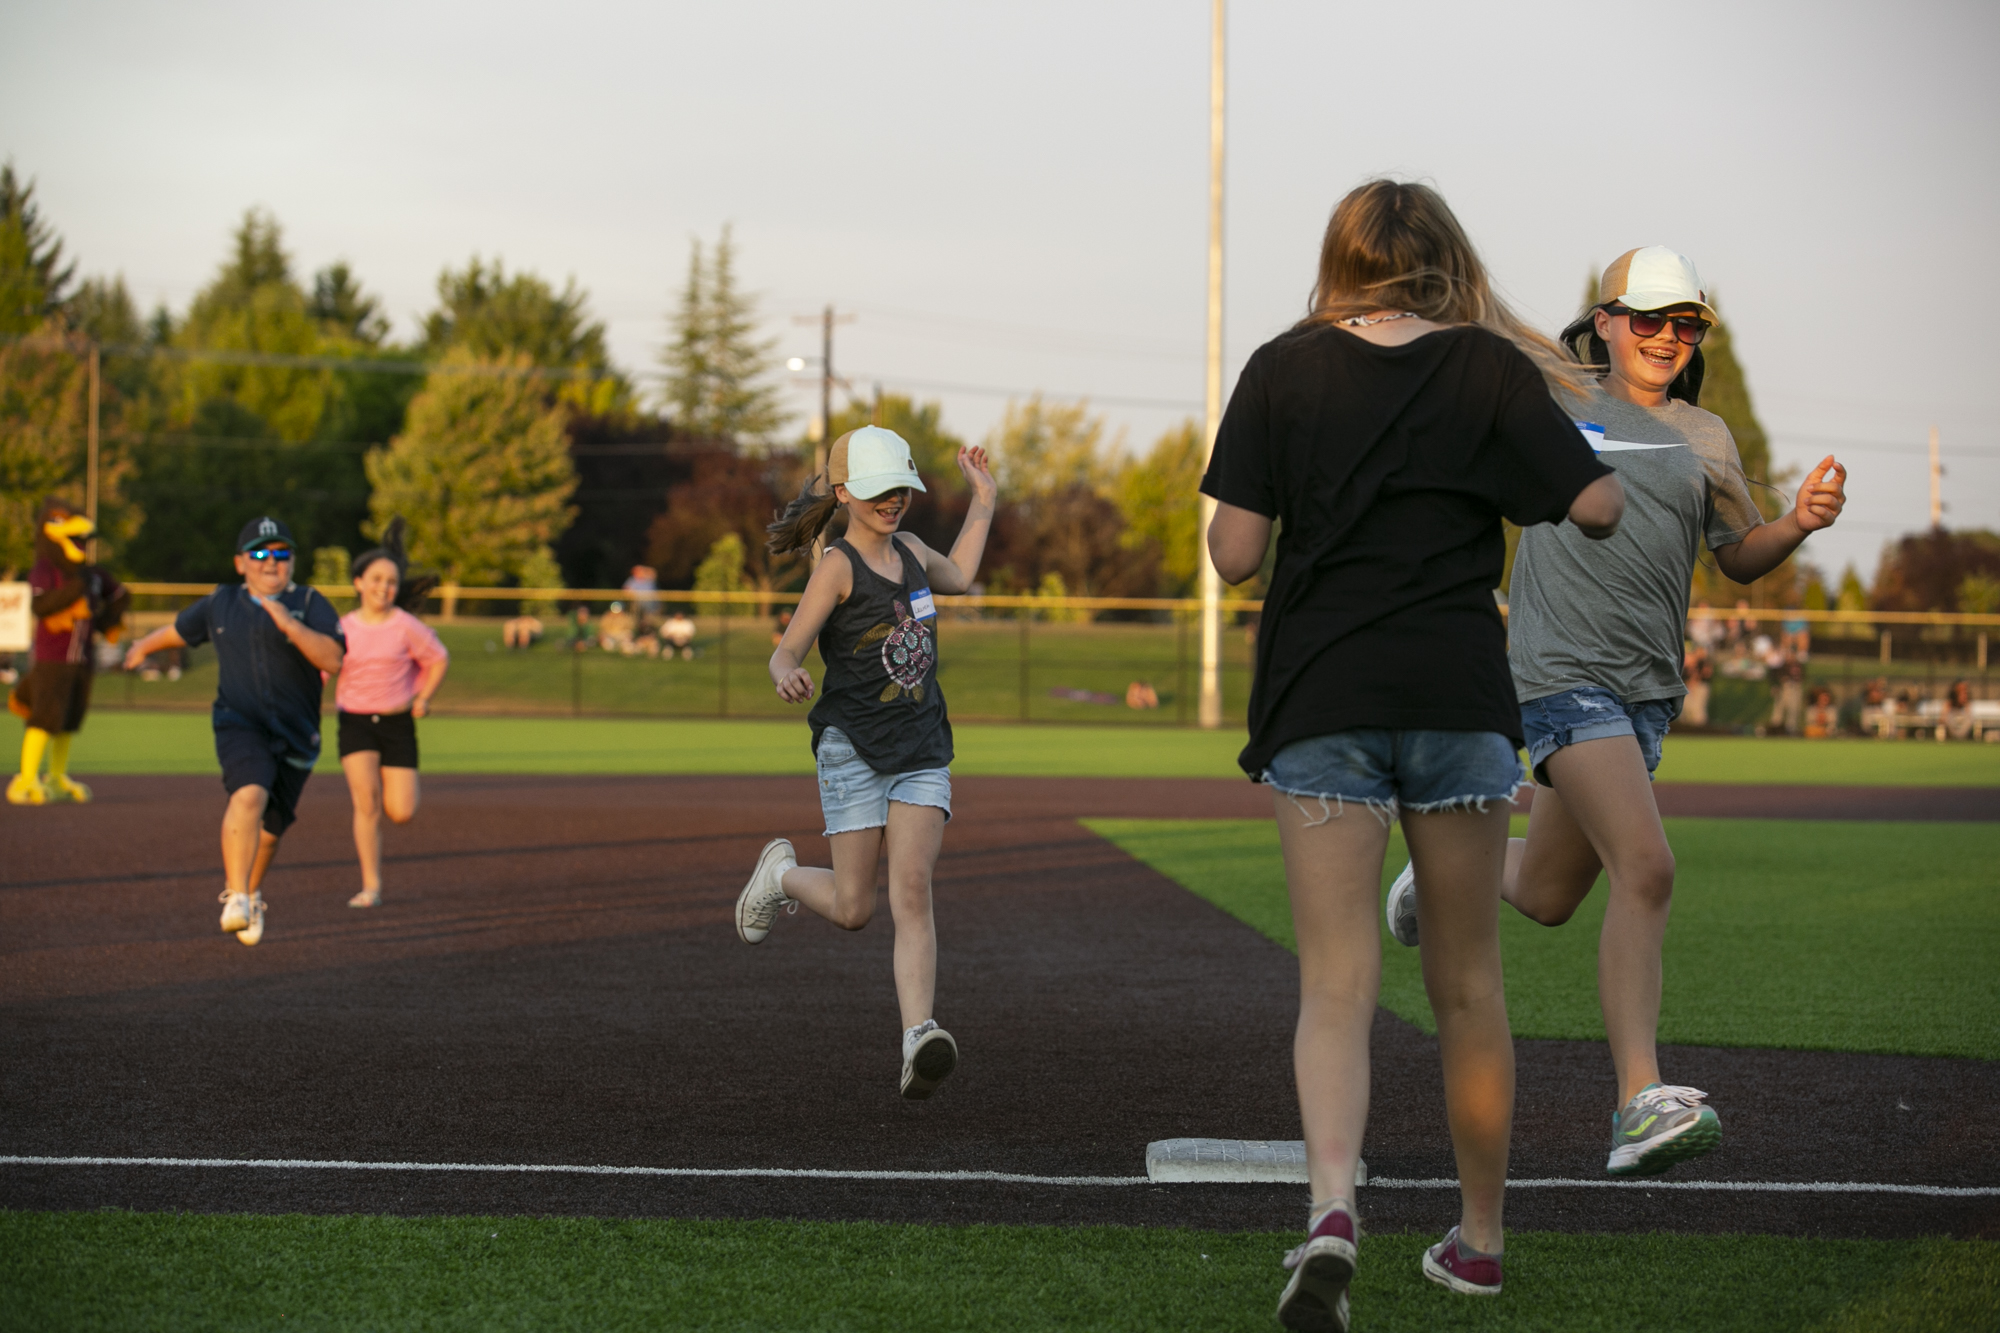 Young baseball fans run the bases in a game against Ridgefields' team Mascot, Rally the Raptor, between innings at Ridgefield Outdoor Recreation Complex on Wednesday, August 4, 2021.